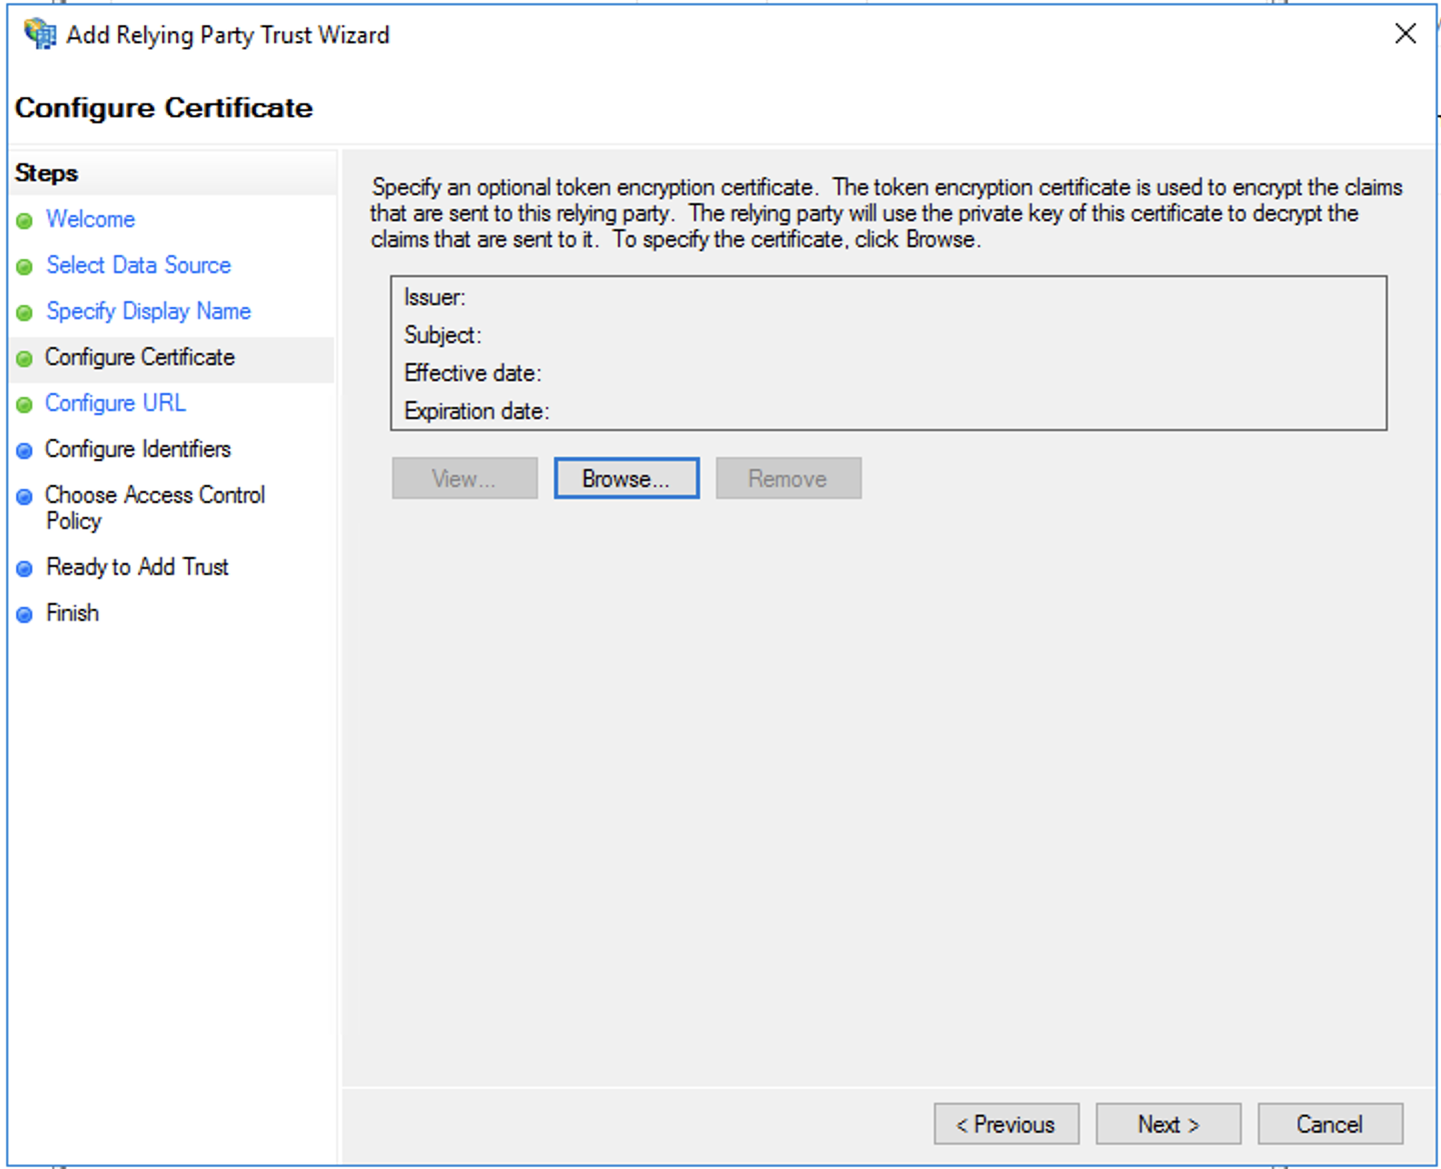 Add relying party trust wizard, configure certificate step